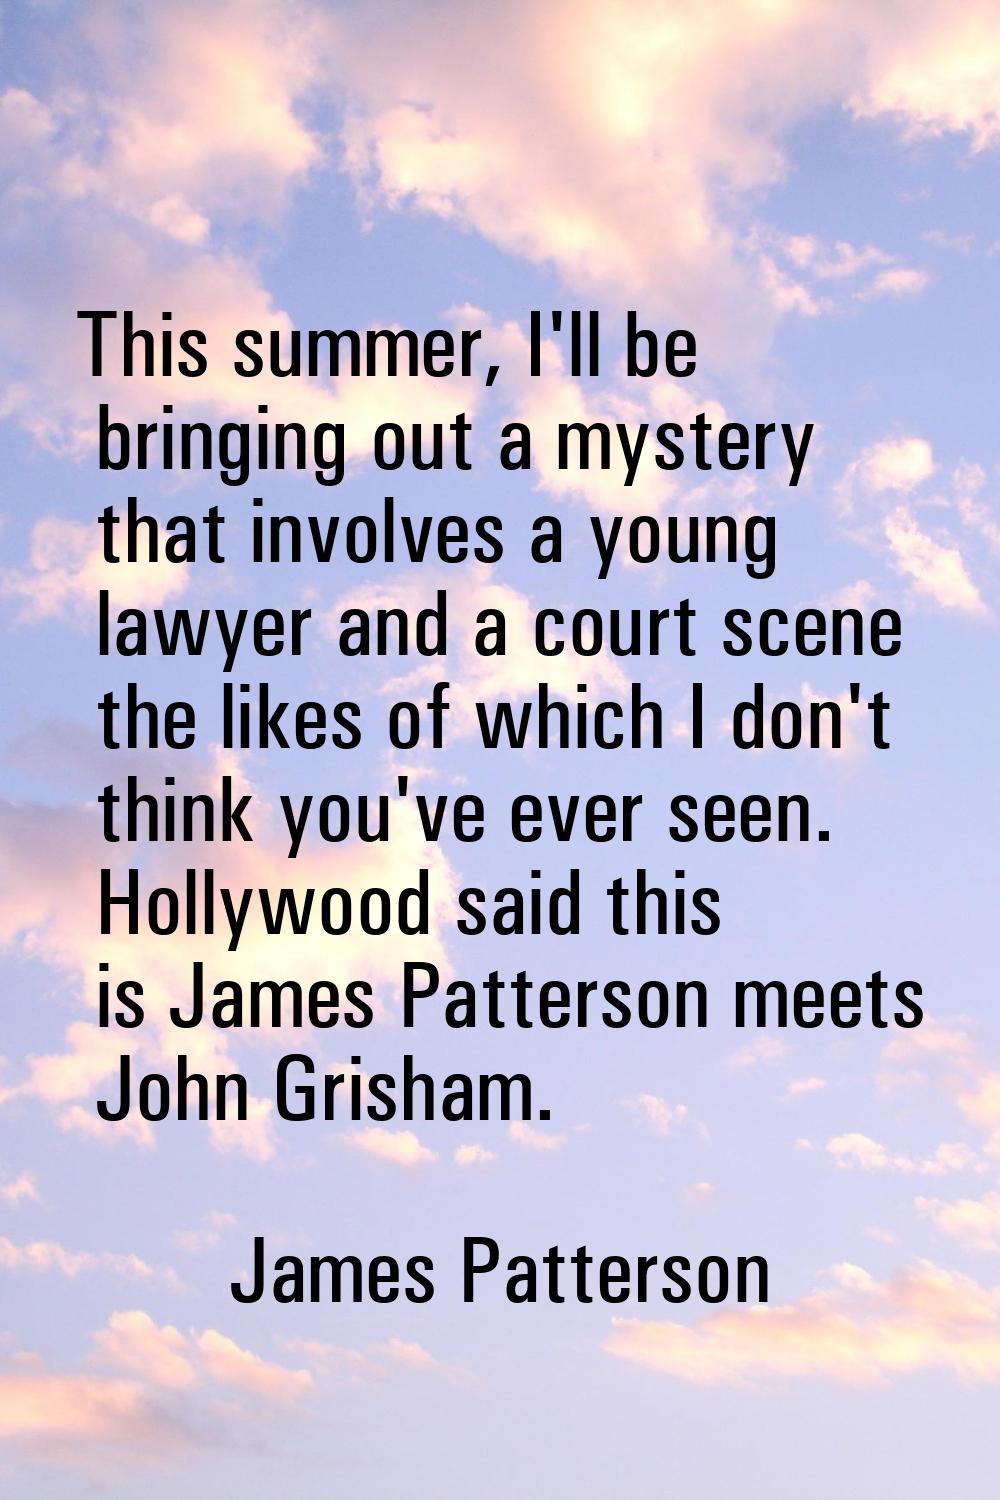 This summer, I'll be bringing out a mystery that involves a young lawyer and a court scene the like